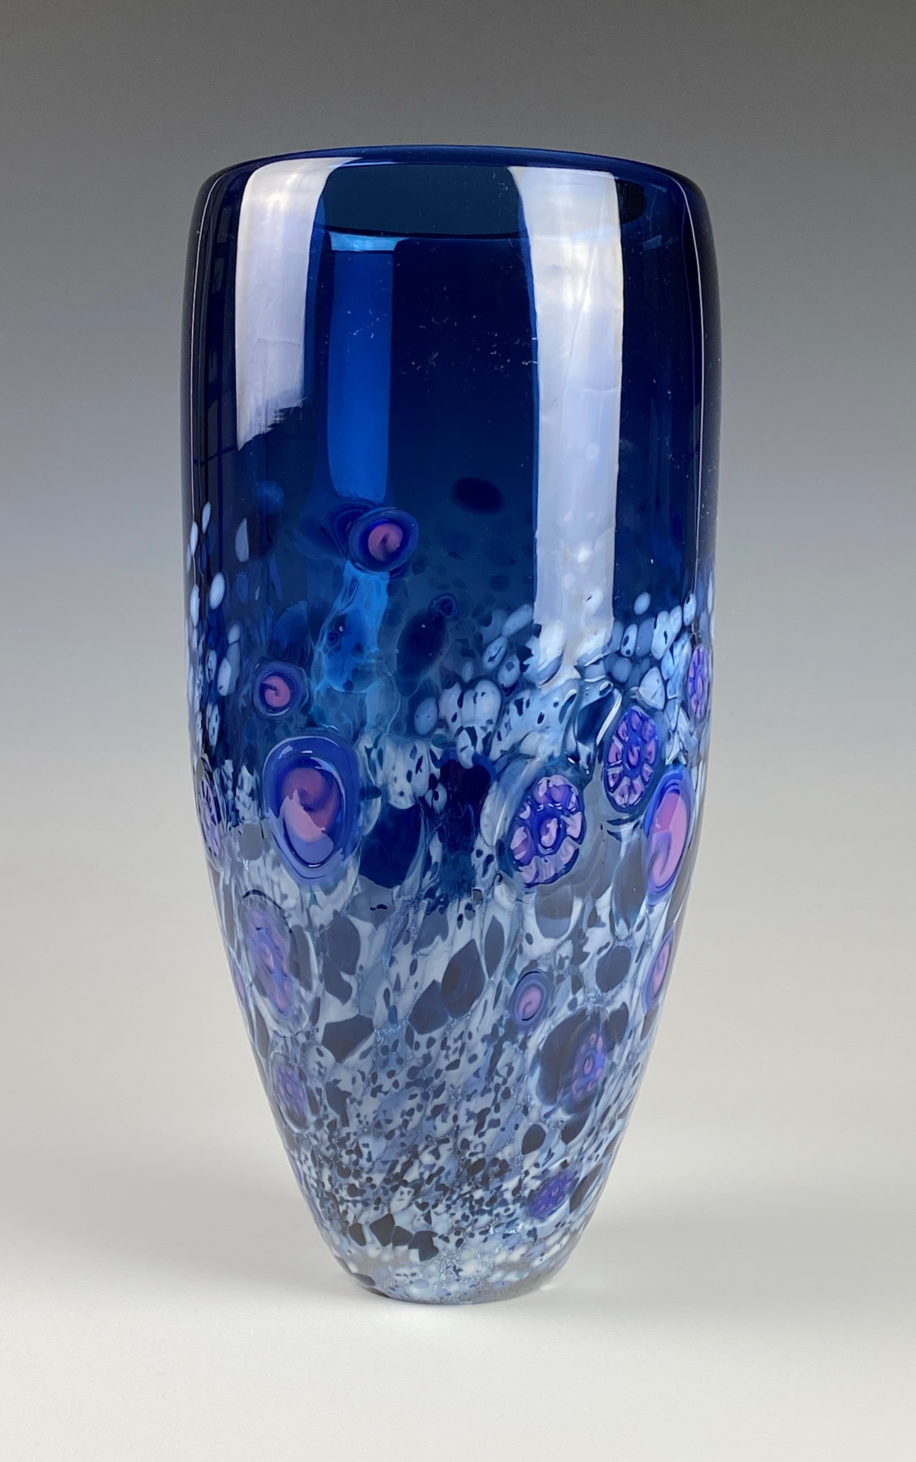 Lily Vase (Steel Blue) by Lisa Samphire at The Avenue Gallery, a contemporary fine art gallery in Victoria, BC, Canada.